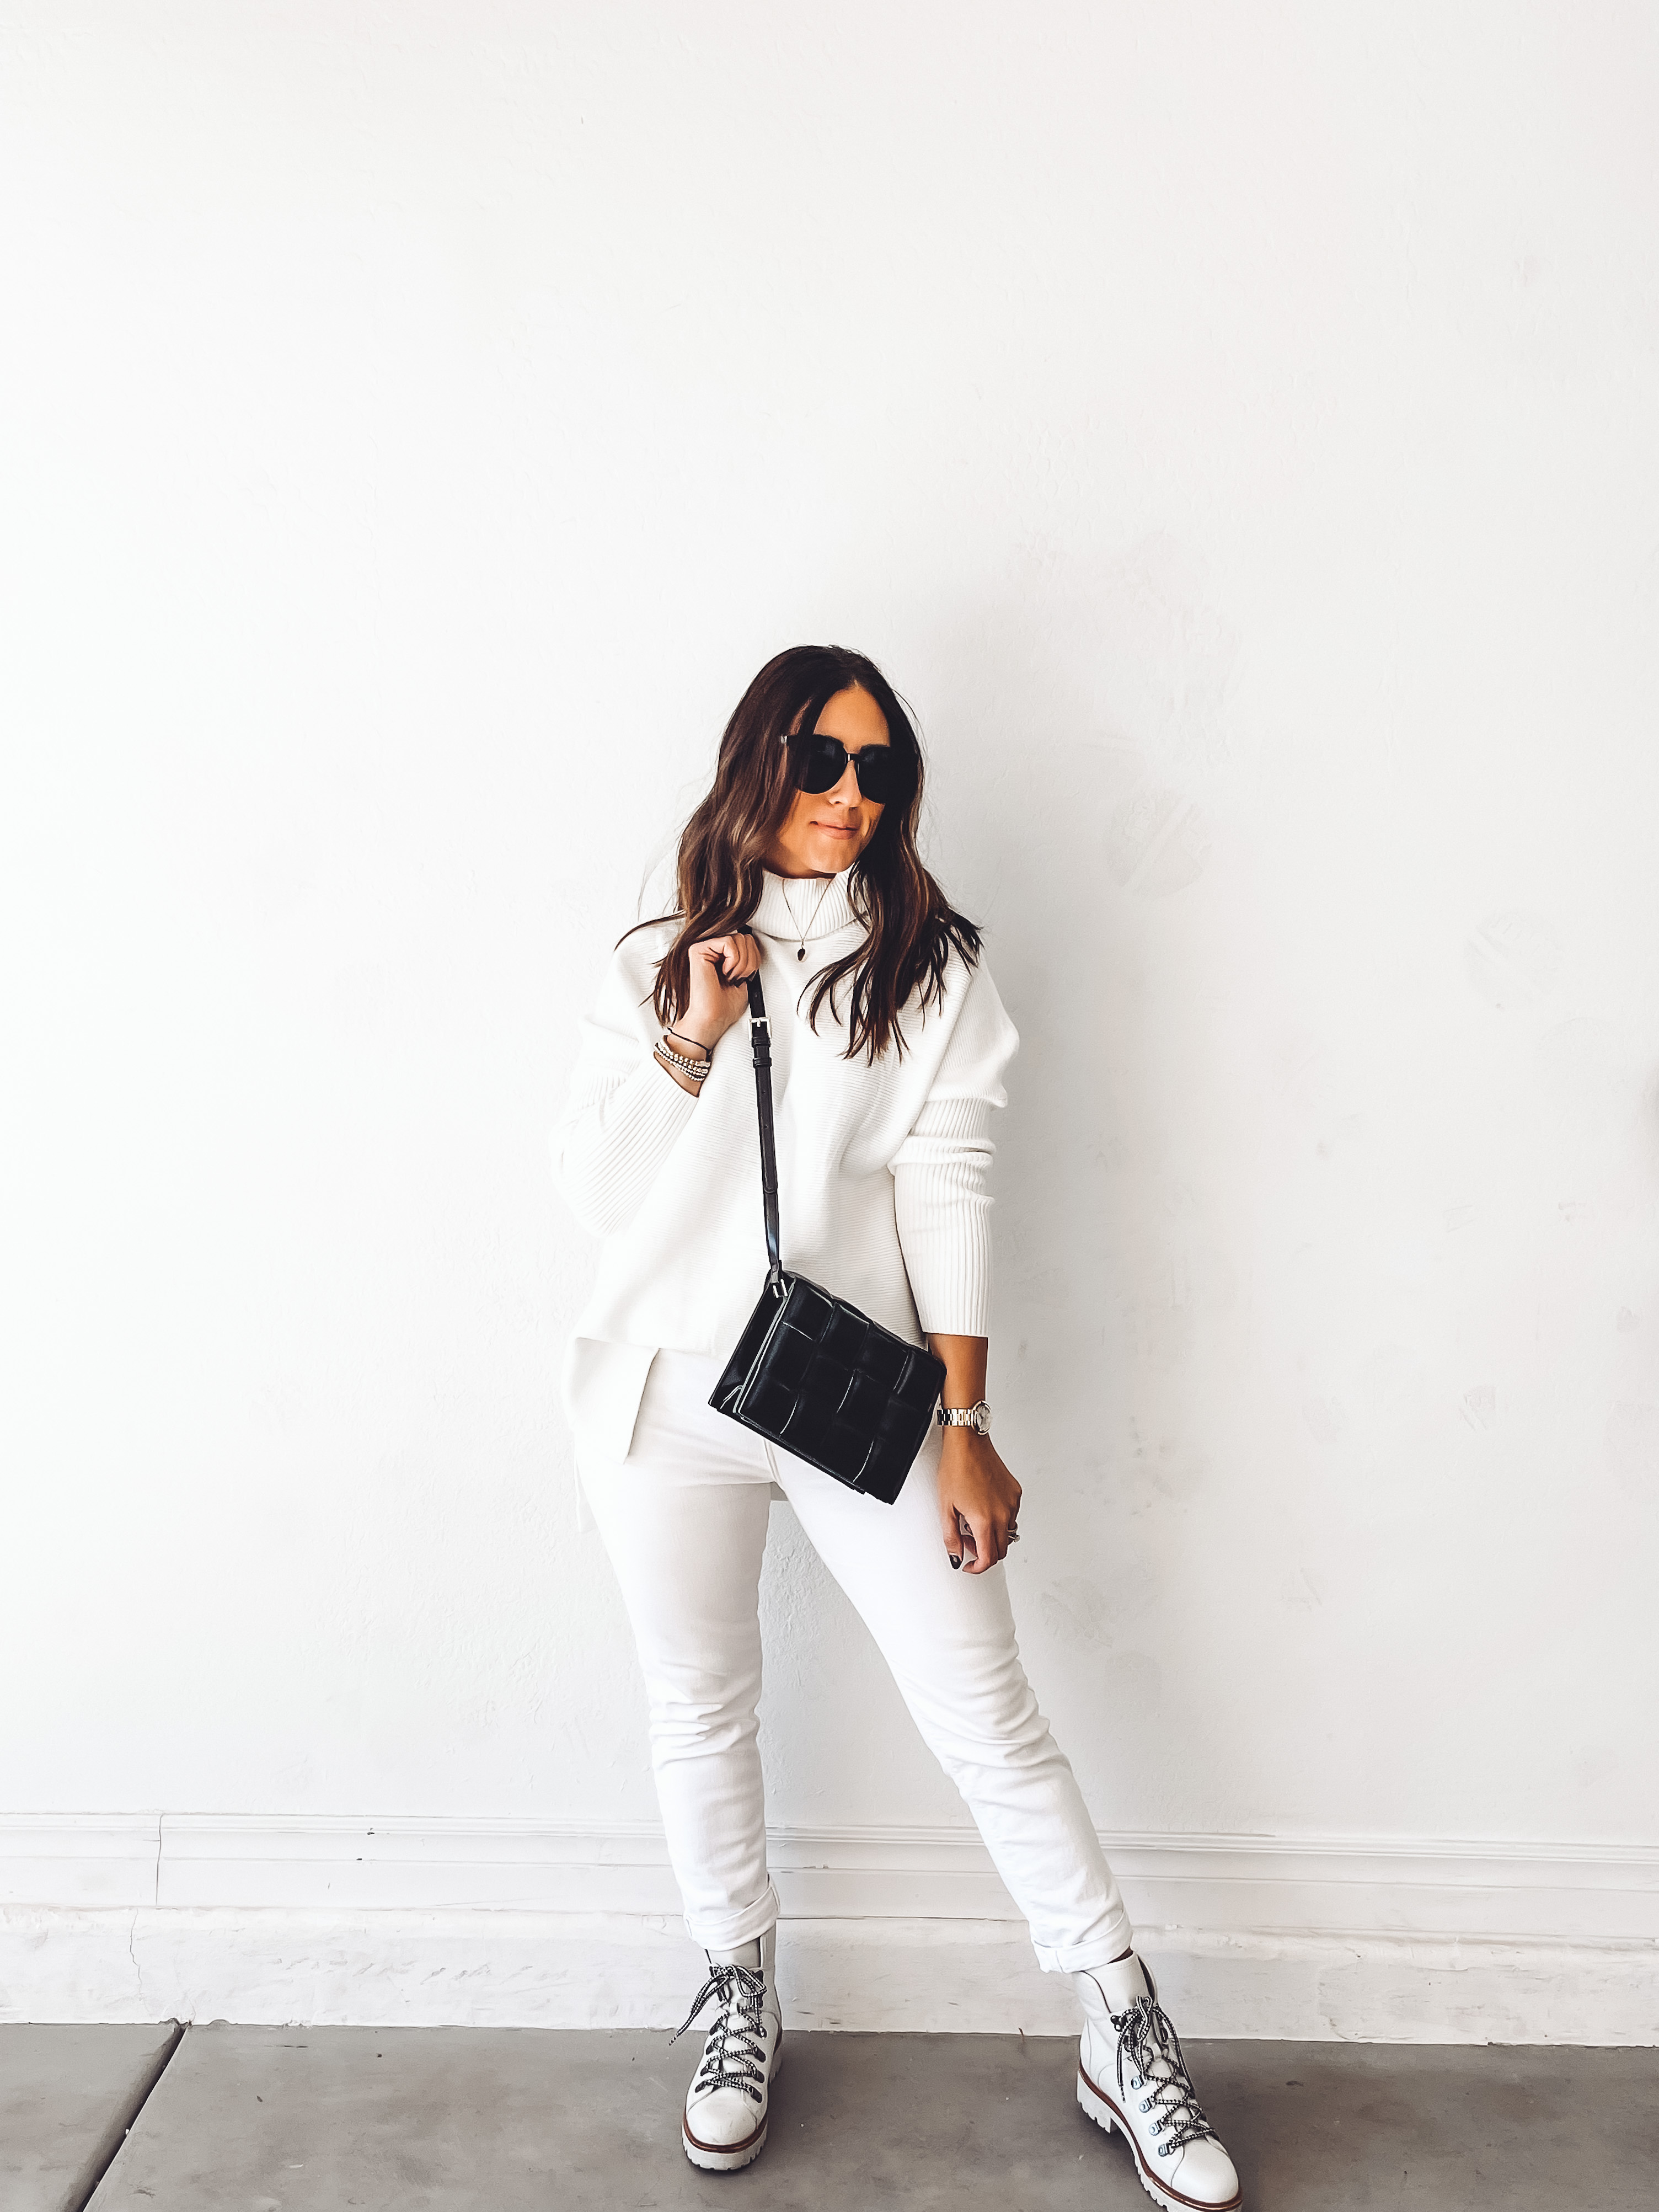 white jeans in winter - Easy Winter White Outfit // 10 white sweater options for winter - This is our Bliss #winterwhite #whitesweaters